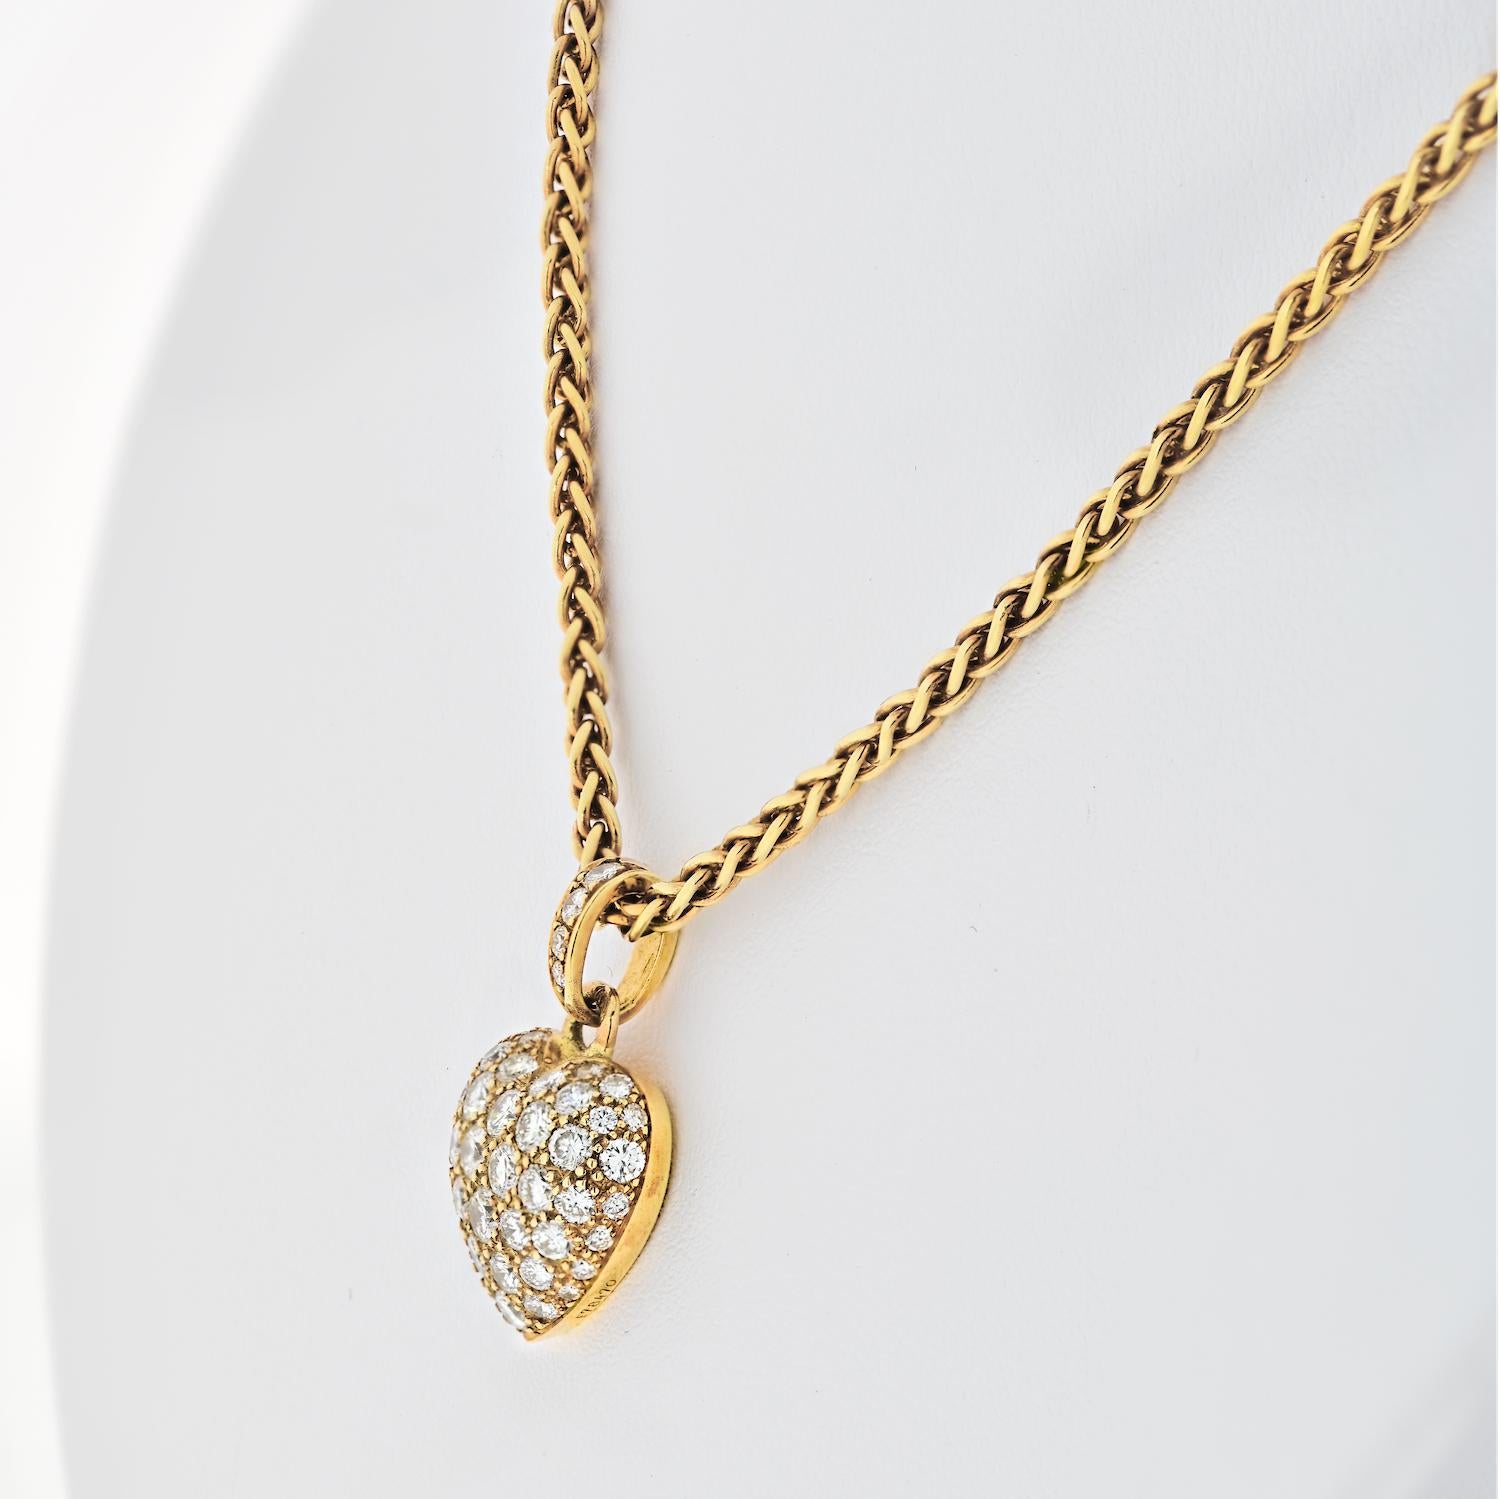 Cartier Rose Gold Pave Diamond Heart Pendant on a Chain Necklace 1